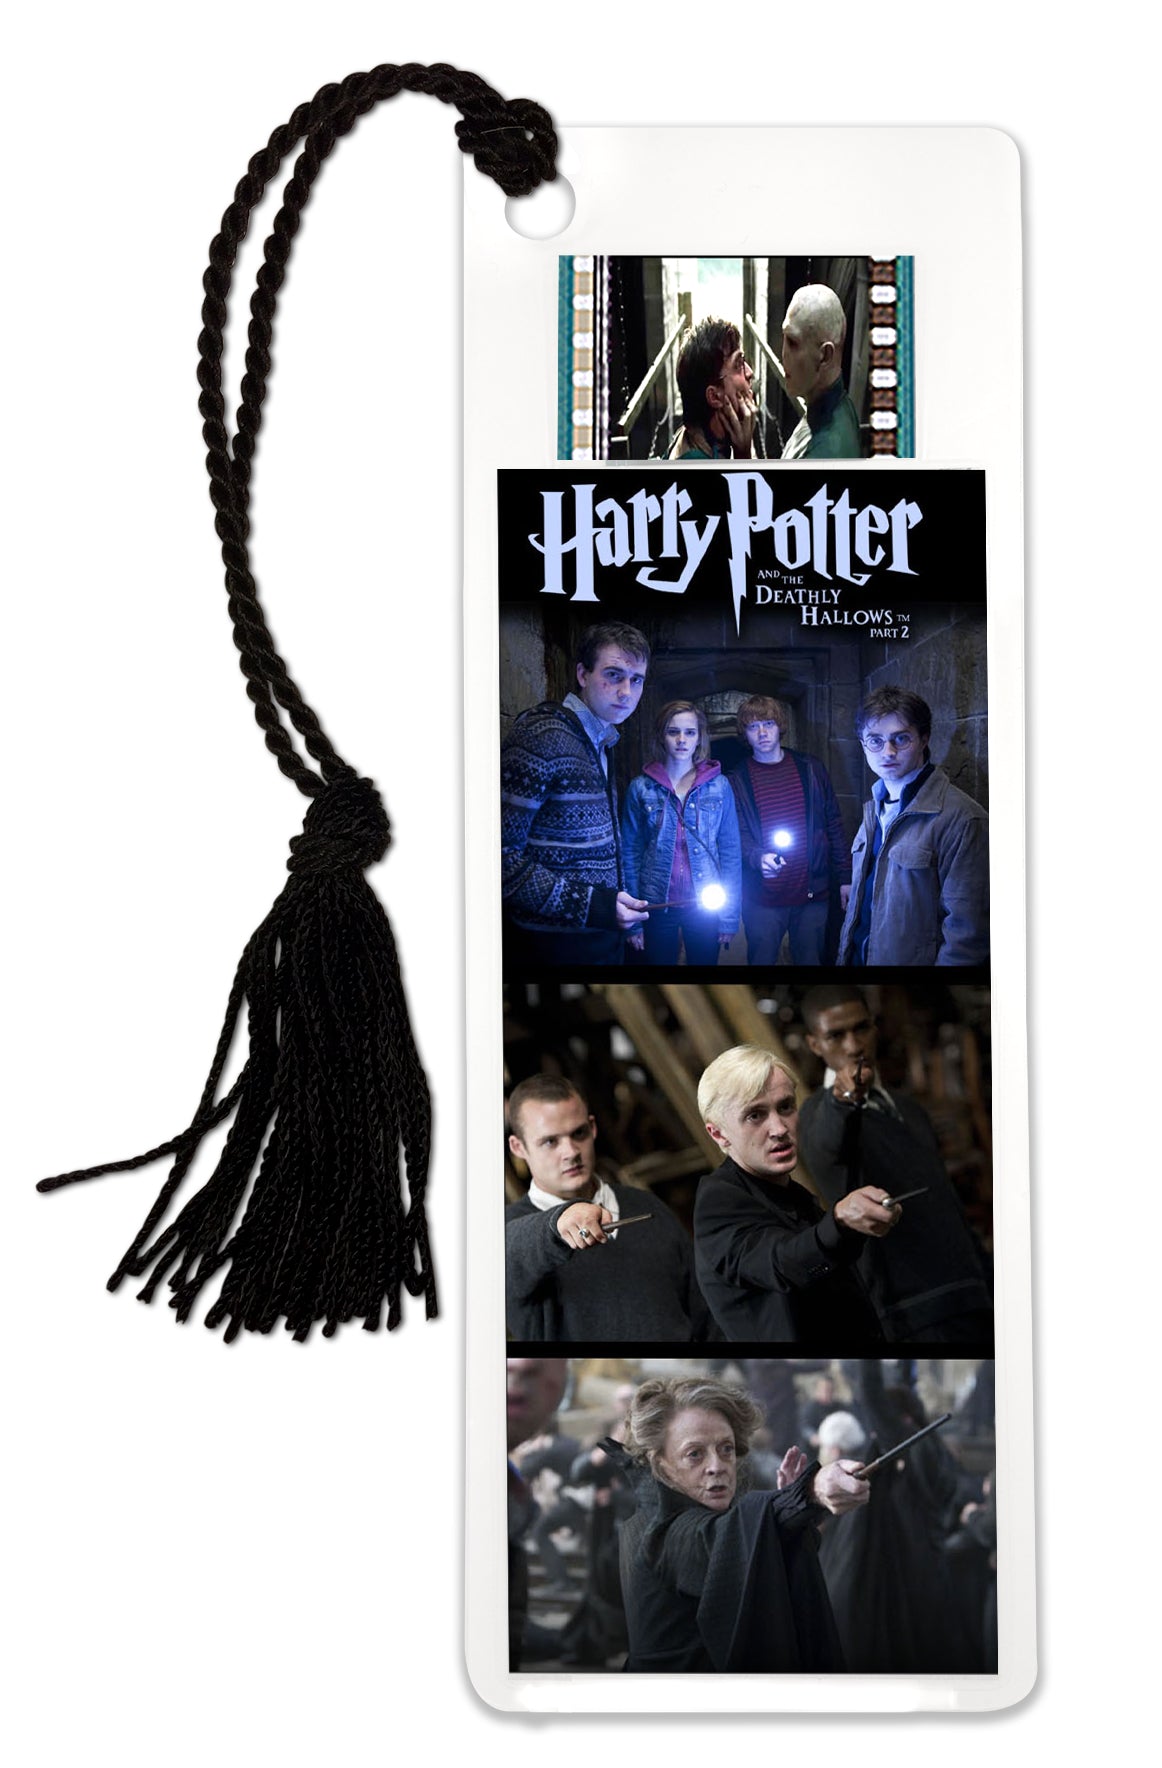 Harry Potter and the Deathly Hallows: Part 2 (Wands) FilmCells™ Bookmark USBM592